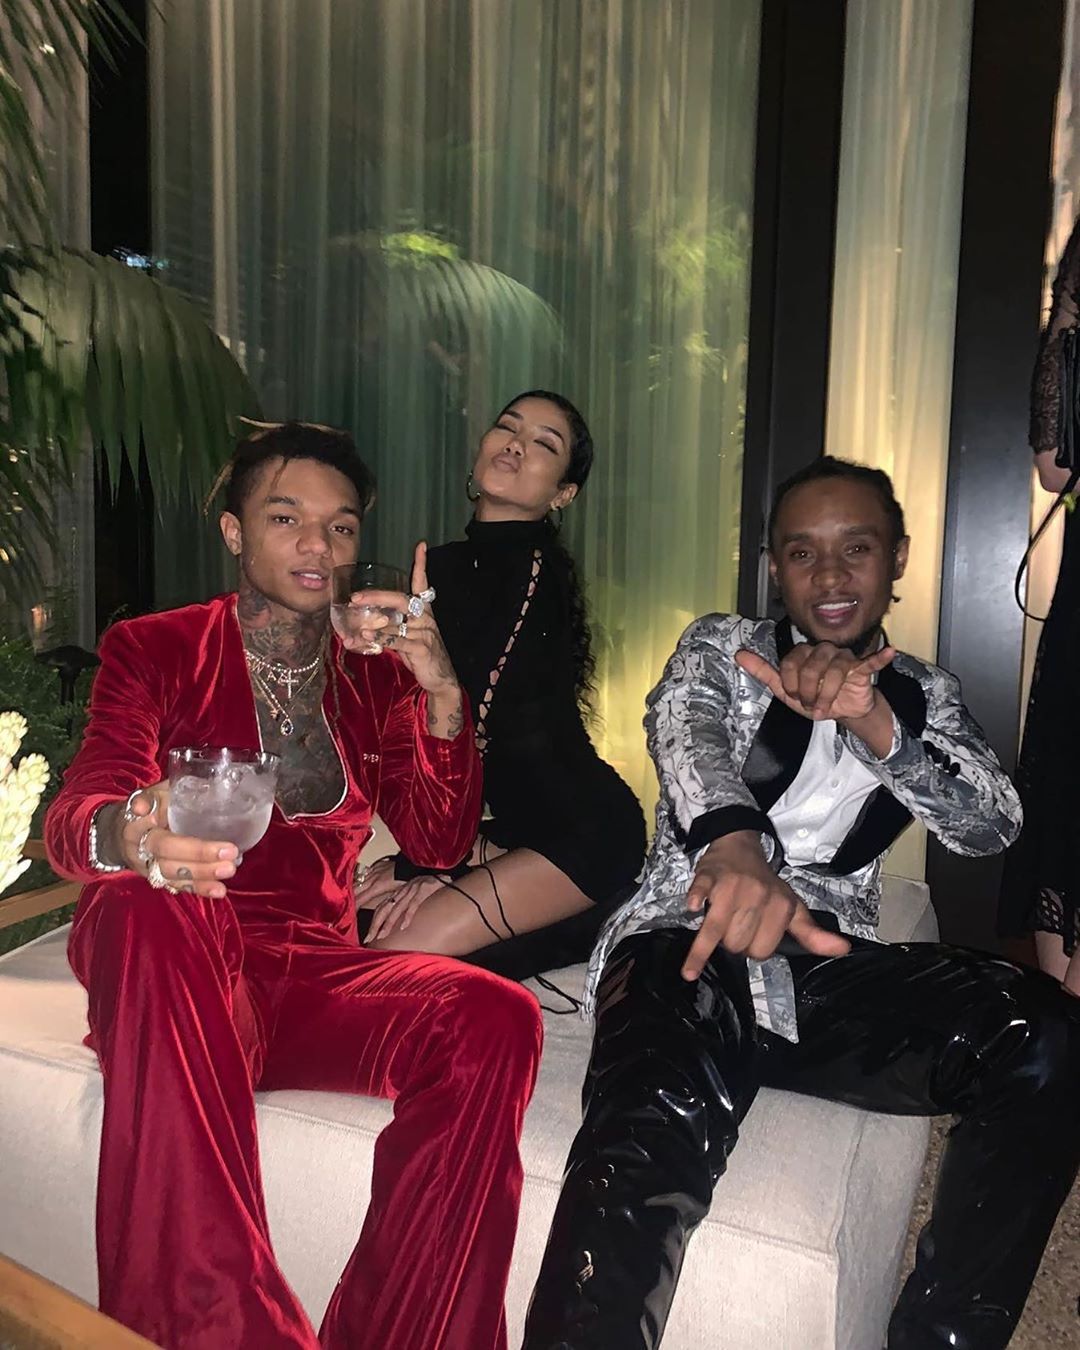 SPOTTED: Swae Lee, Slim Jimmy & Jhene Aiko Show Out In Pyer Moss ...